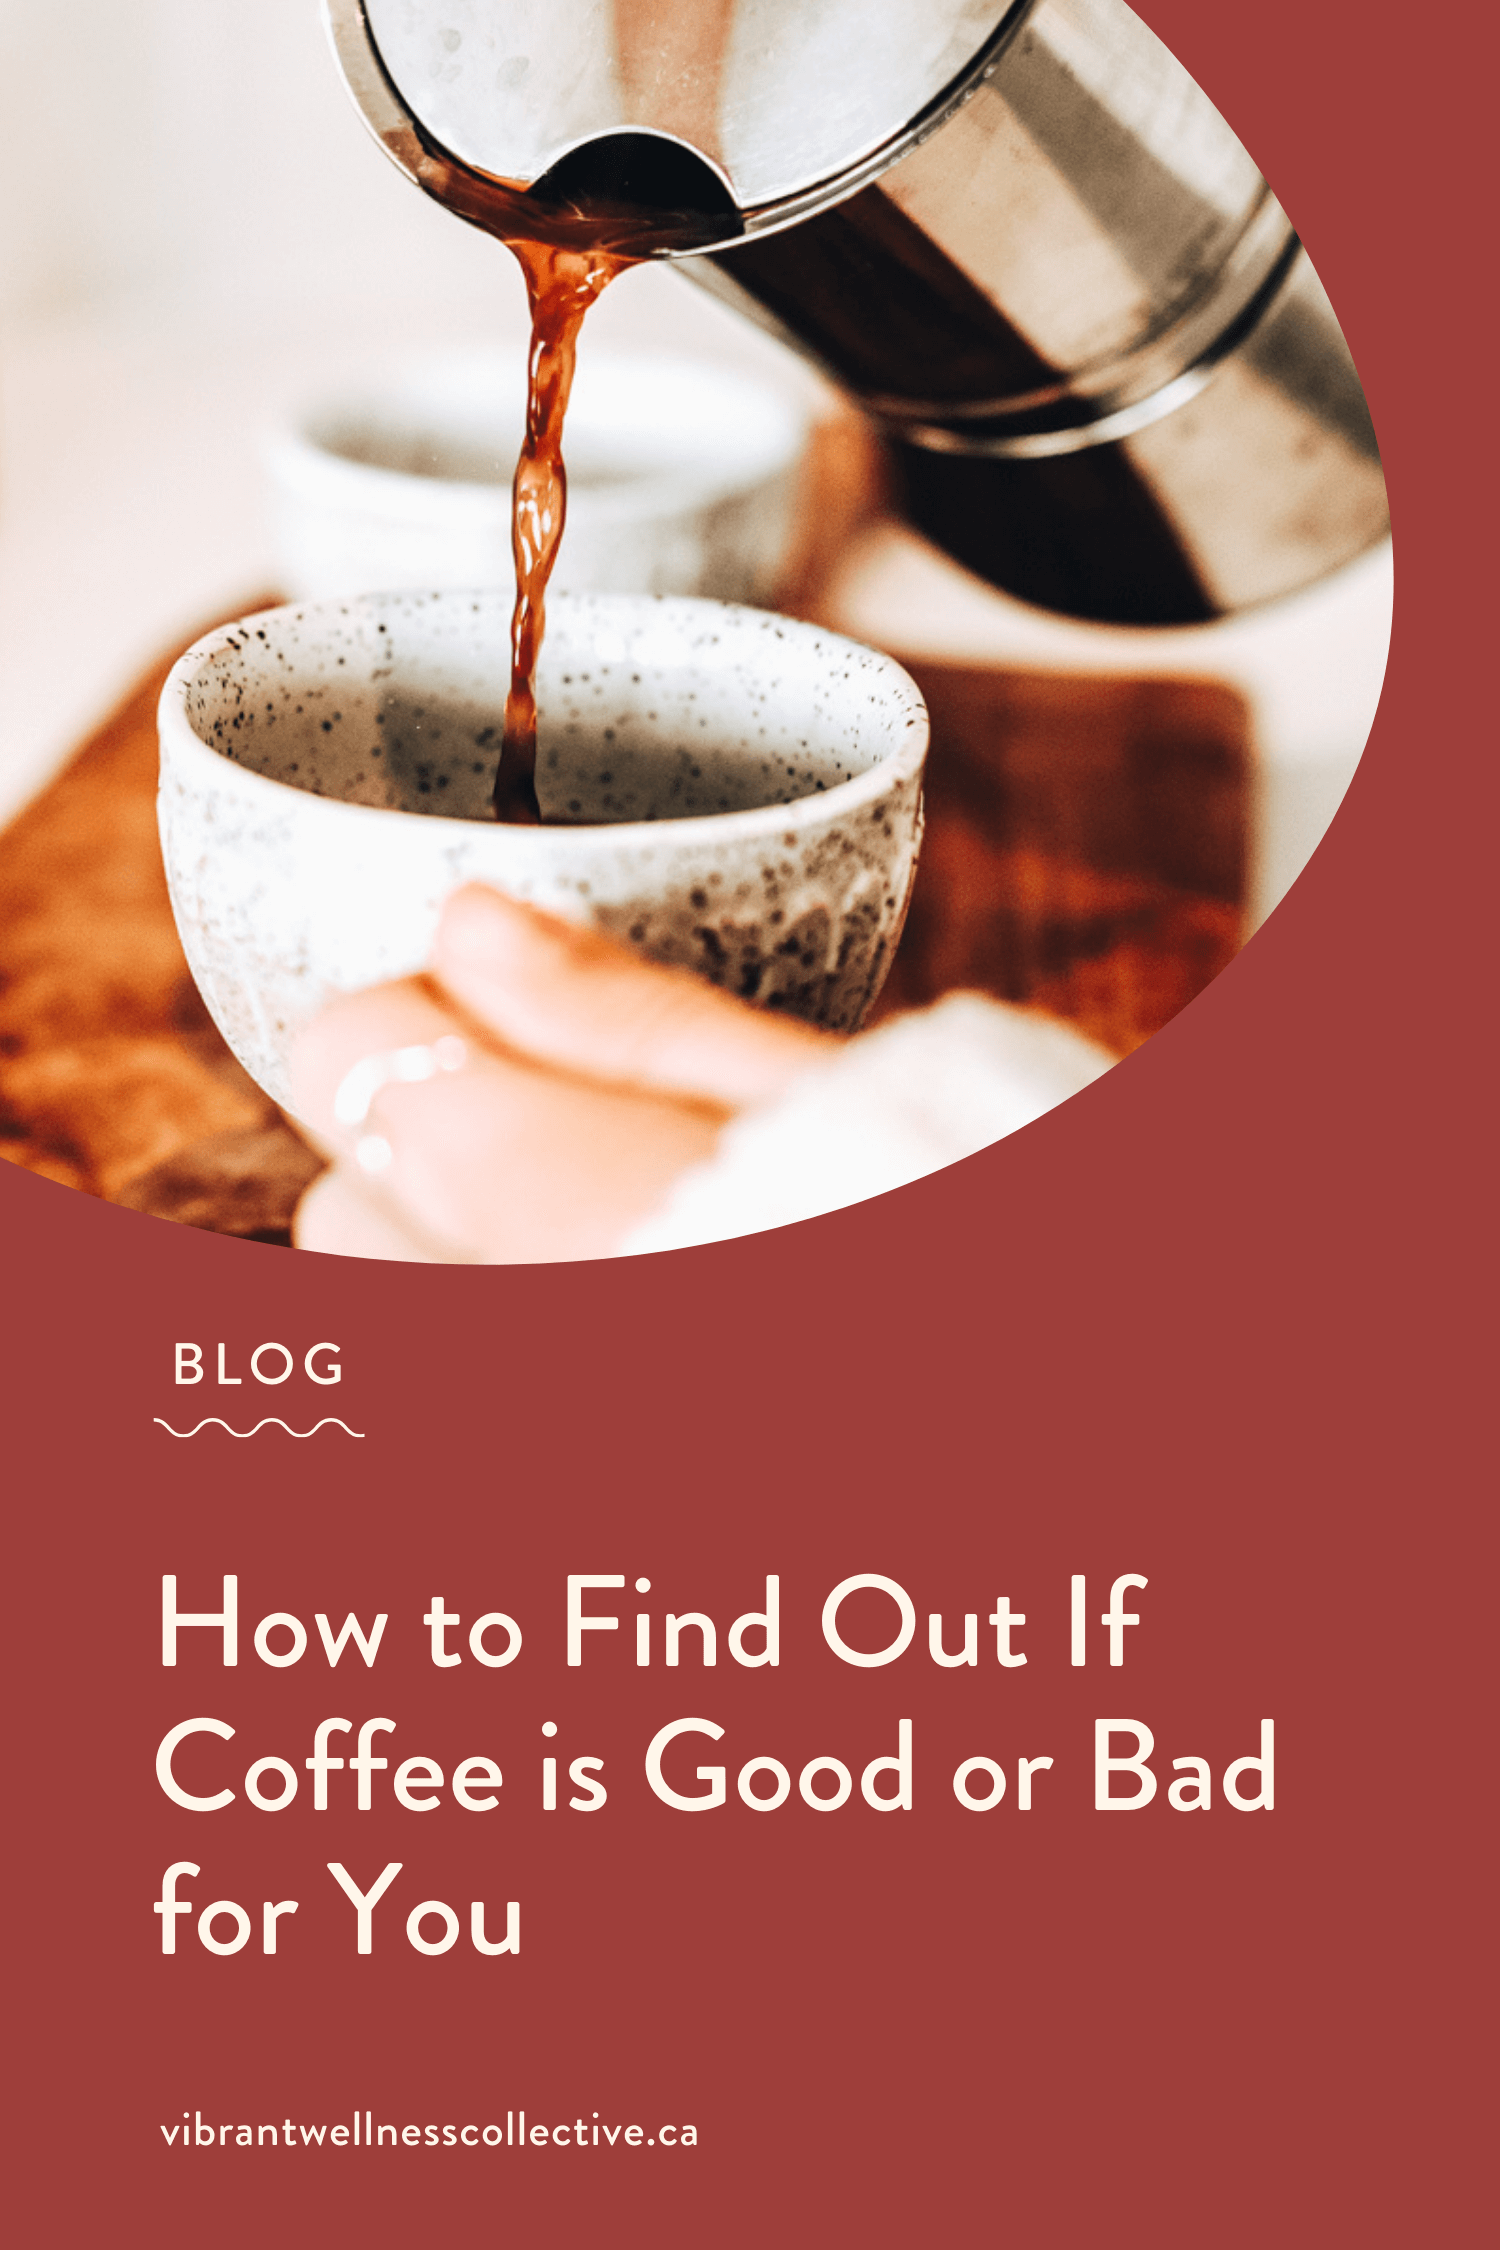 Is Coffee Bad For You